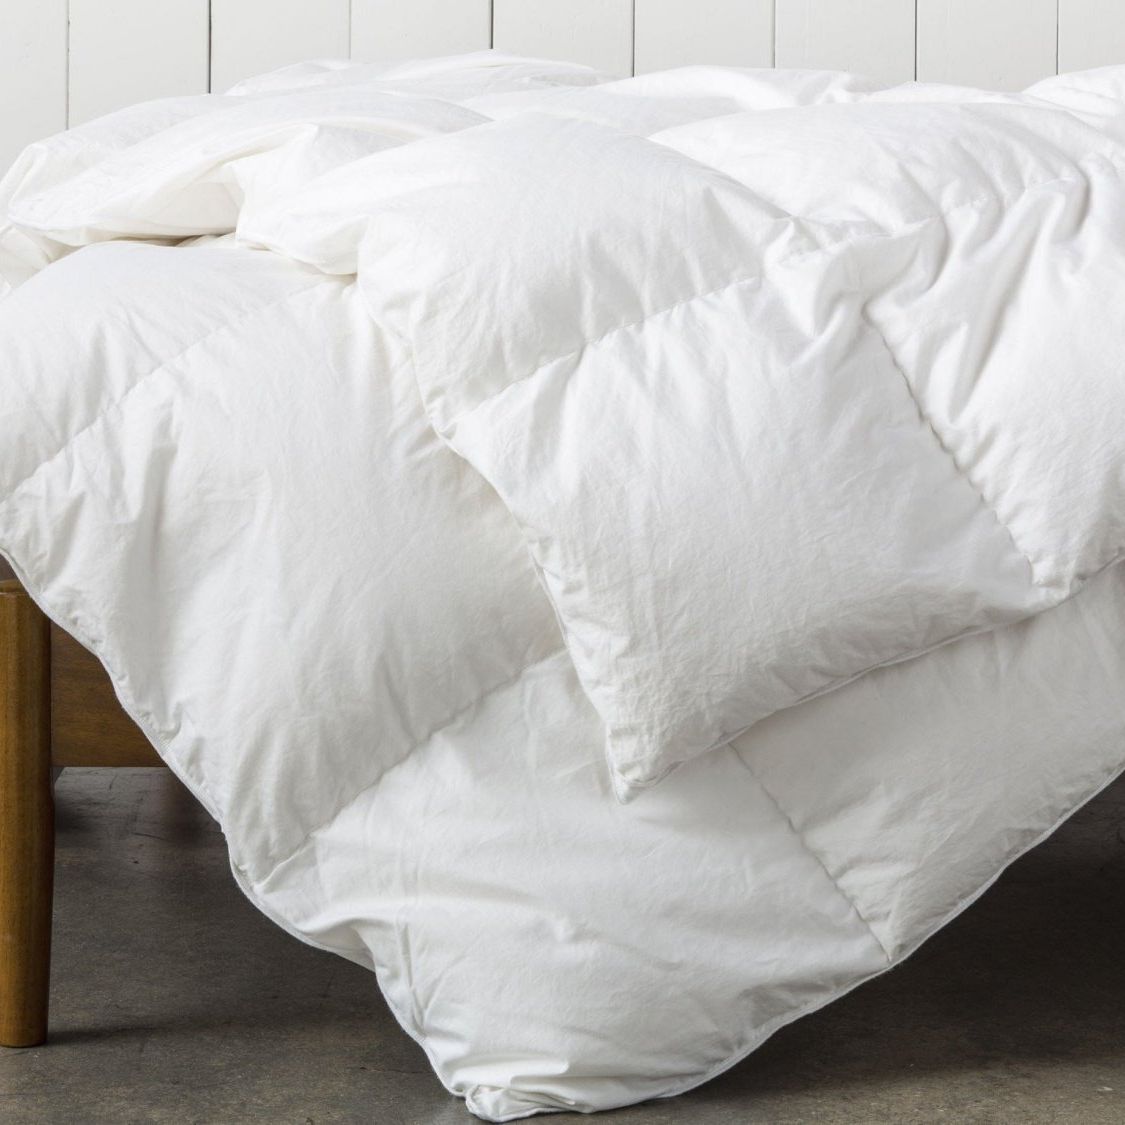 17 Best Comforters On 2021 The, How To Put A Super King Duvet Cover On Queen Comforter